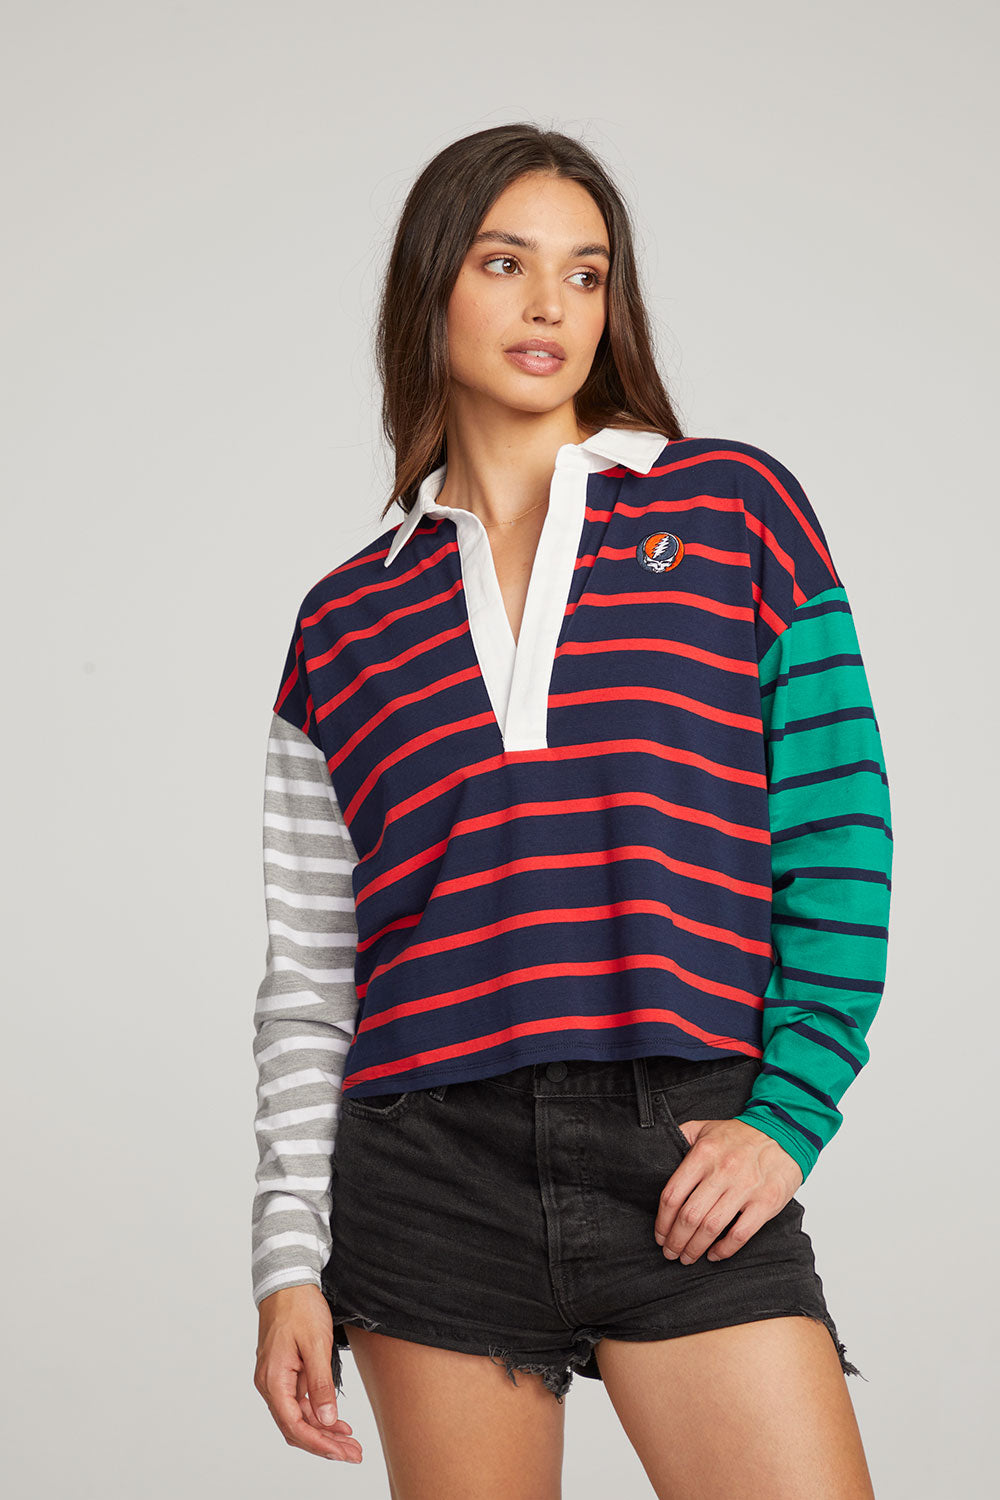 Grateful Dead Stealie Rugby Shirt WOMENS chaserbrand